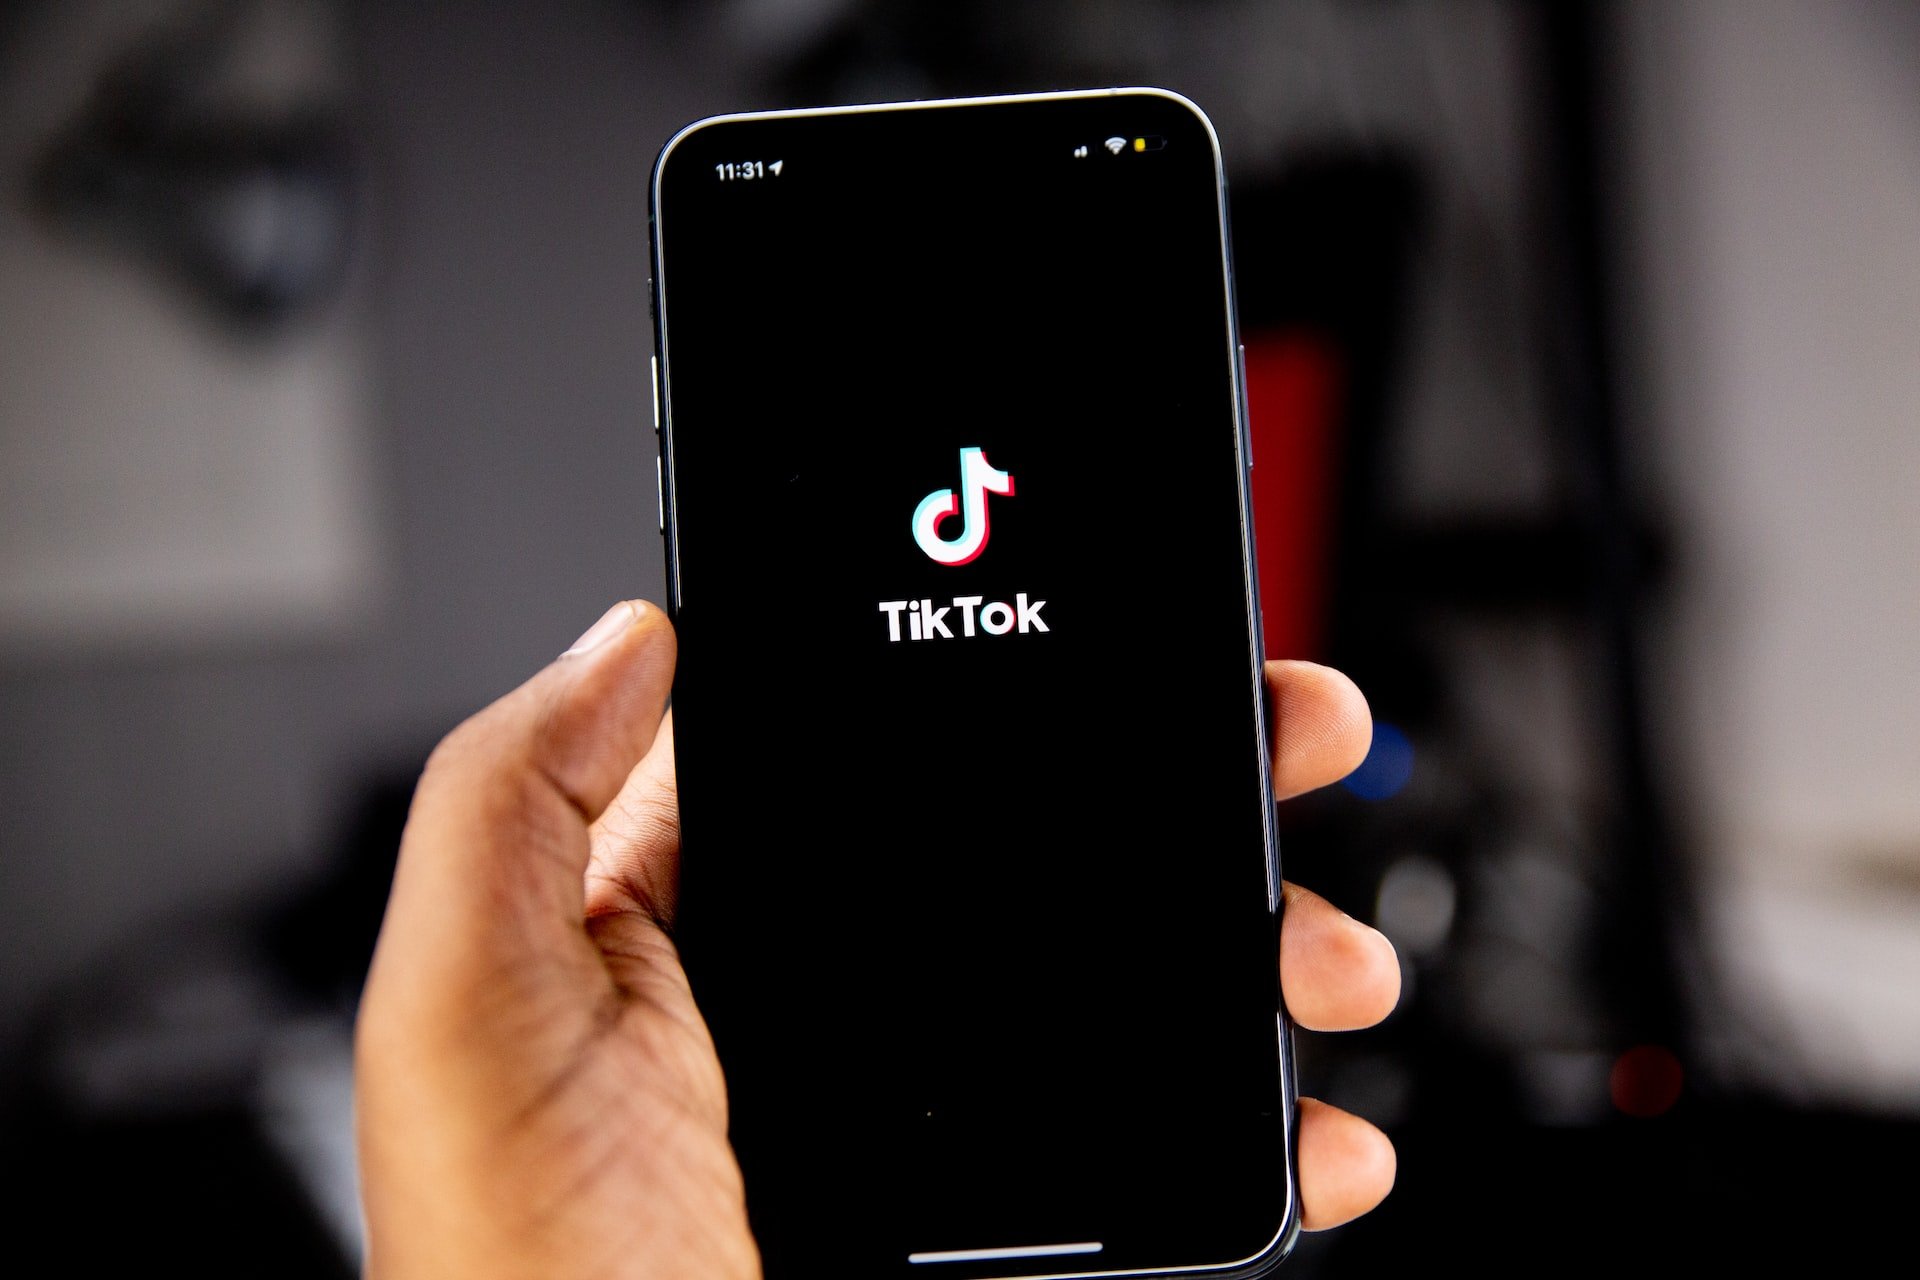 A hand holding an iphone displaying a TikTok interface